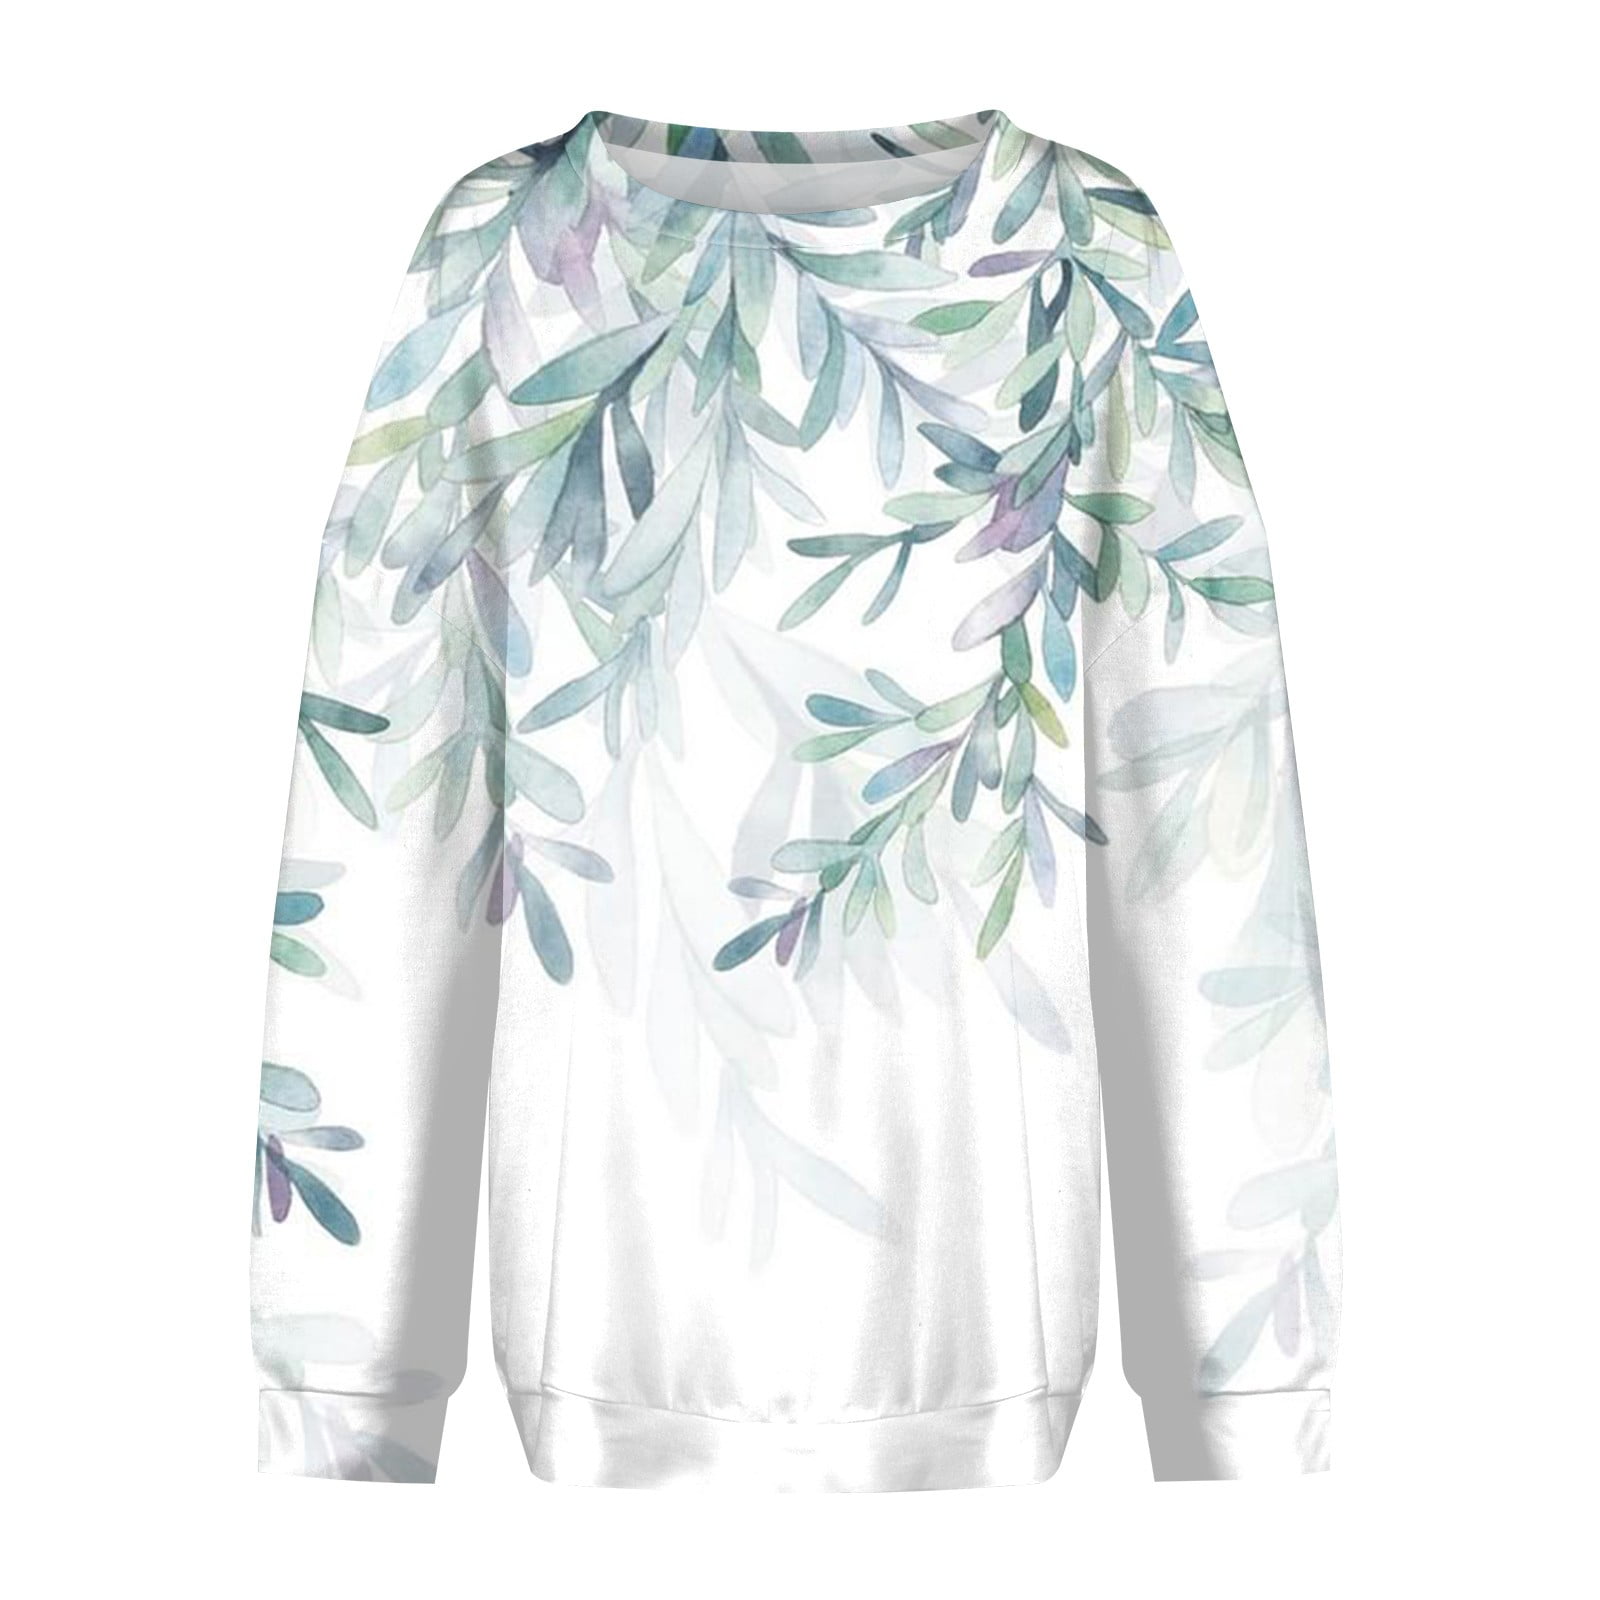 Umitay Essential Hoodie Women's Casual Fashion Floral Print Round